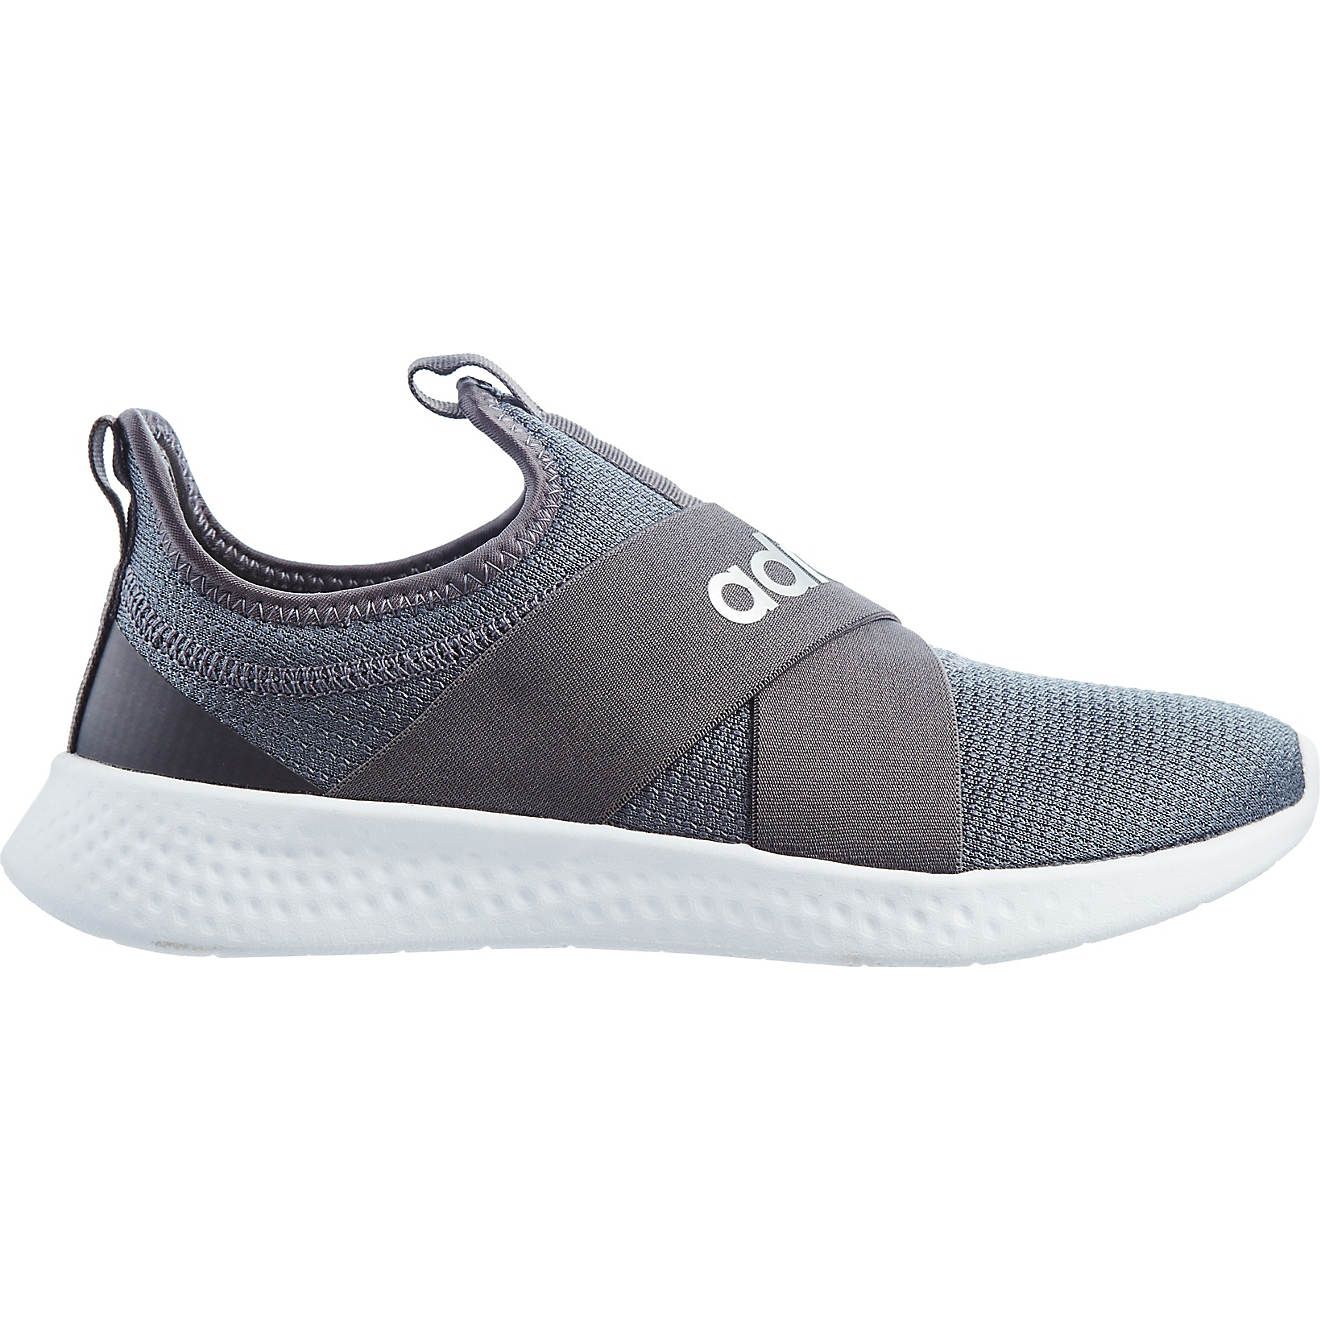 adidas Women's Puremotion Adapt Slip-On Lifestyle Shoes | Academy | Academy Sports + Outdoors